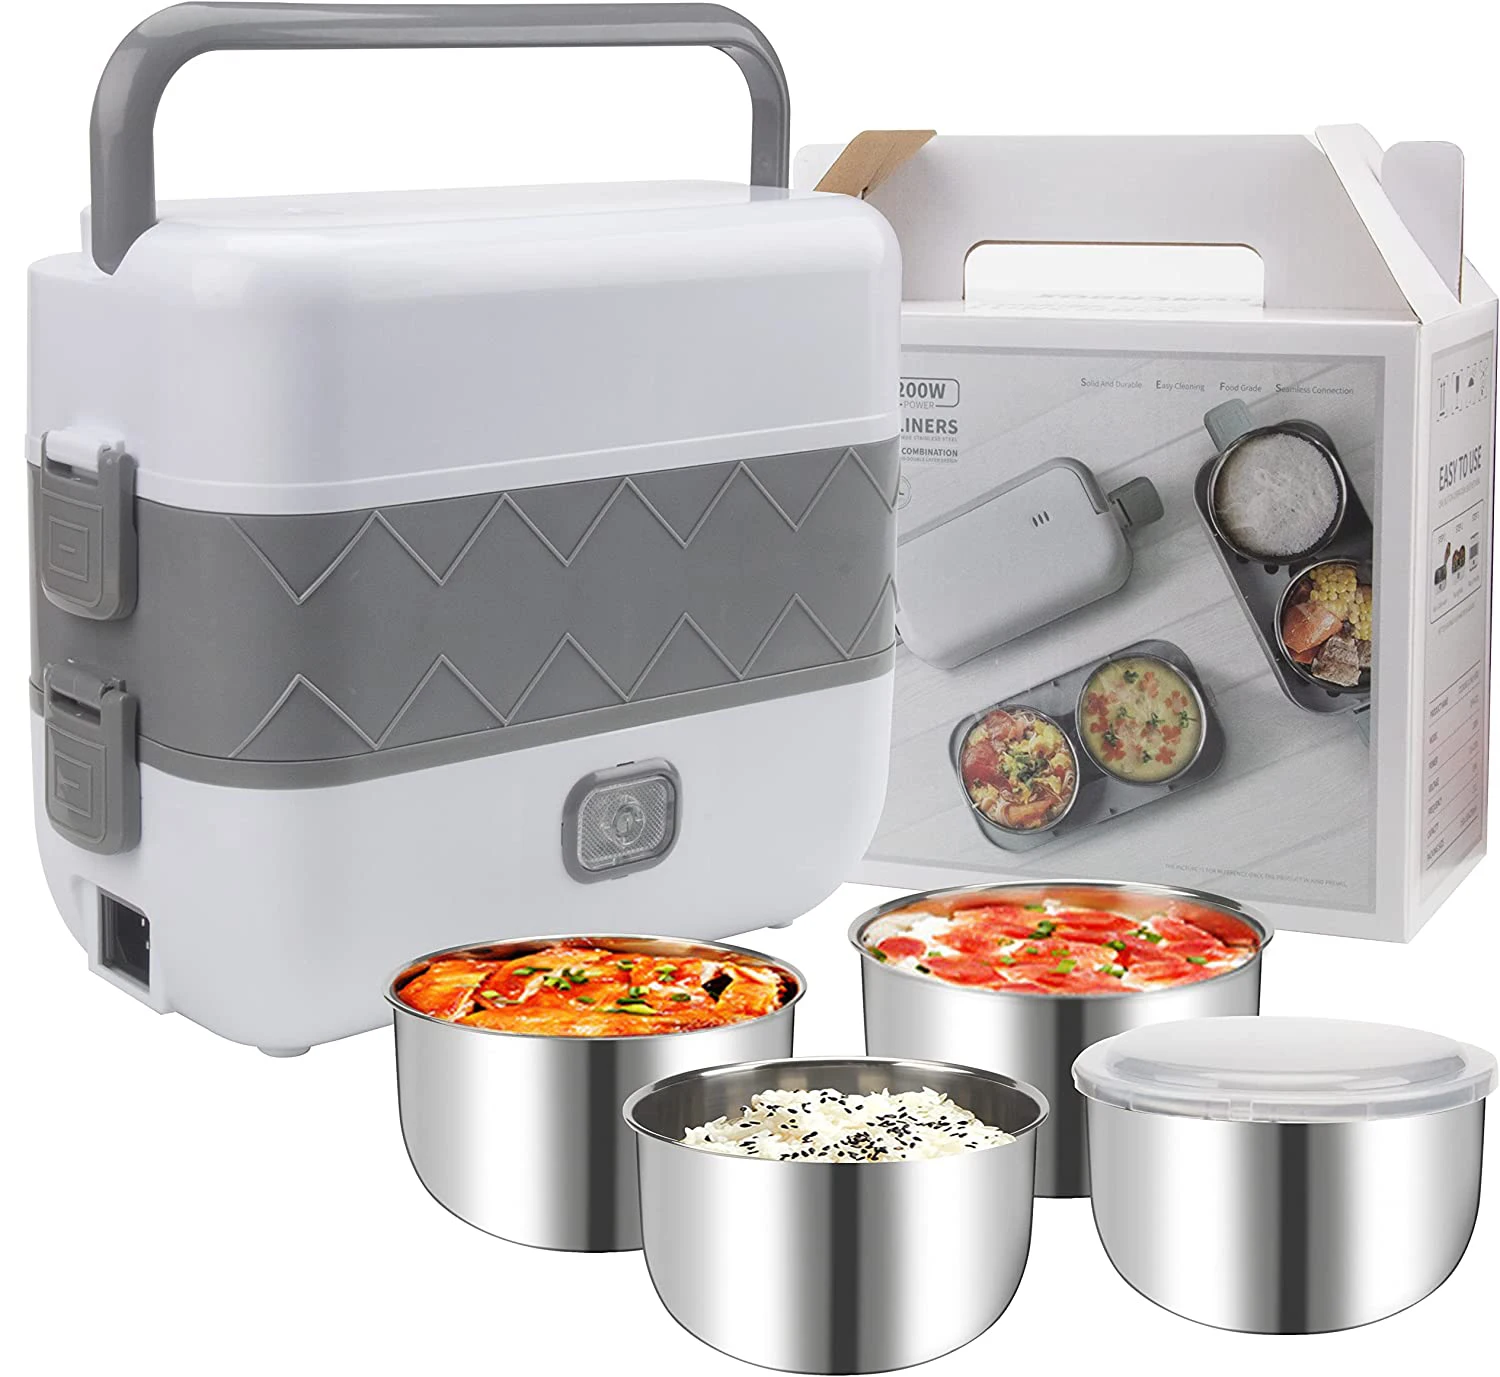 https://ae01.alicdn.com/kf/S5c7ea8d213194436b15f530a90af602an/Electric-Lunch-Box-Self-Cooking-Electric-Lunch-Box-Heating-Lunch-Box-Portable-Food-Warmer-Lunch-Box.jpg